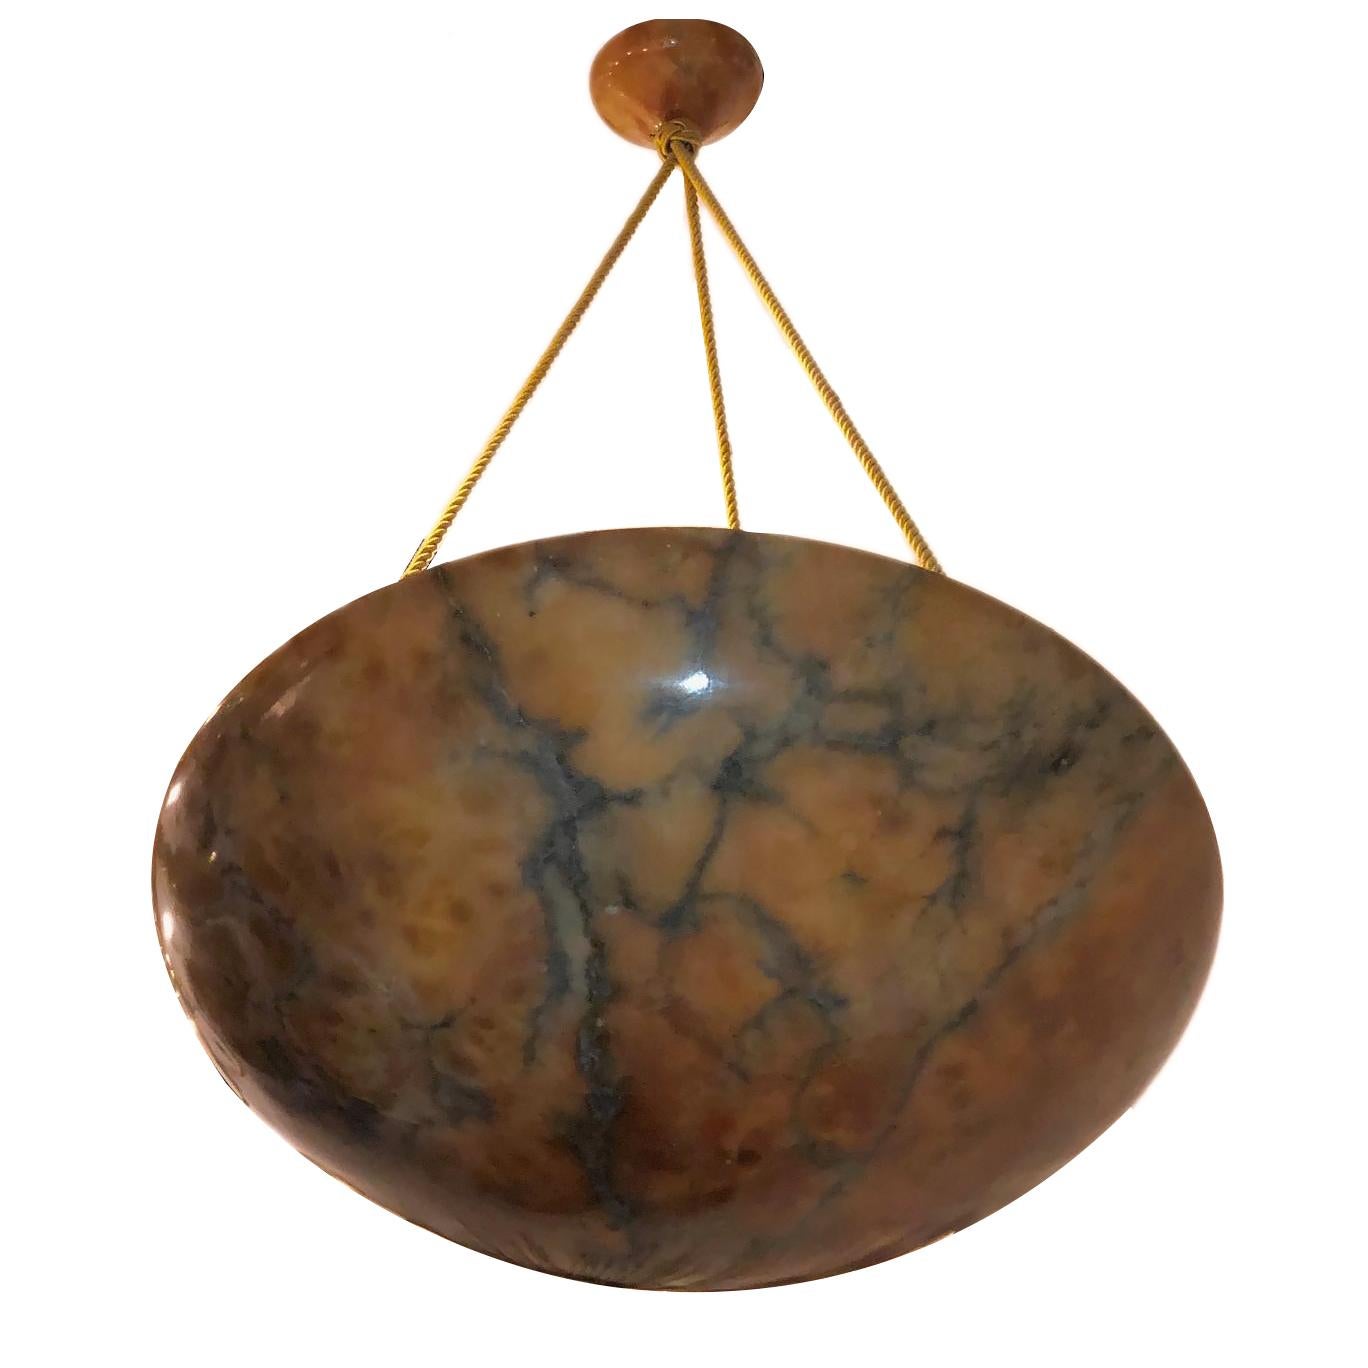 A French circa 1920s carved alabaster light fixture with interior lights.

Measurements:
Diameter 22.5